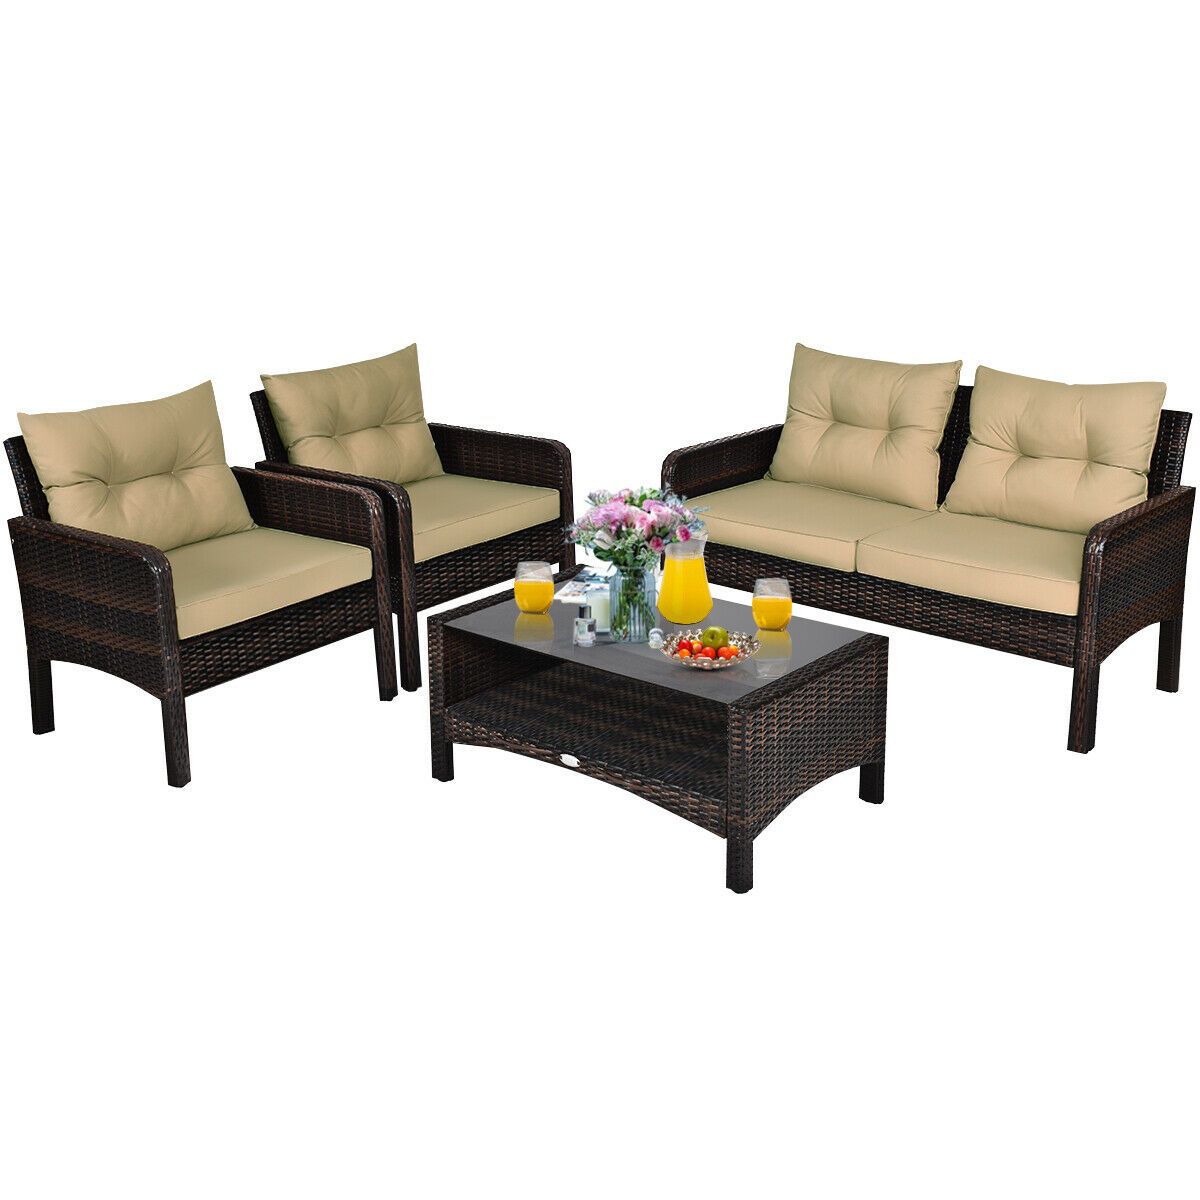 4 Pcs Patio Rattan Furniture Set with Loveseat Sofa Coffee Table For Garden